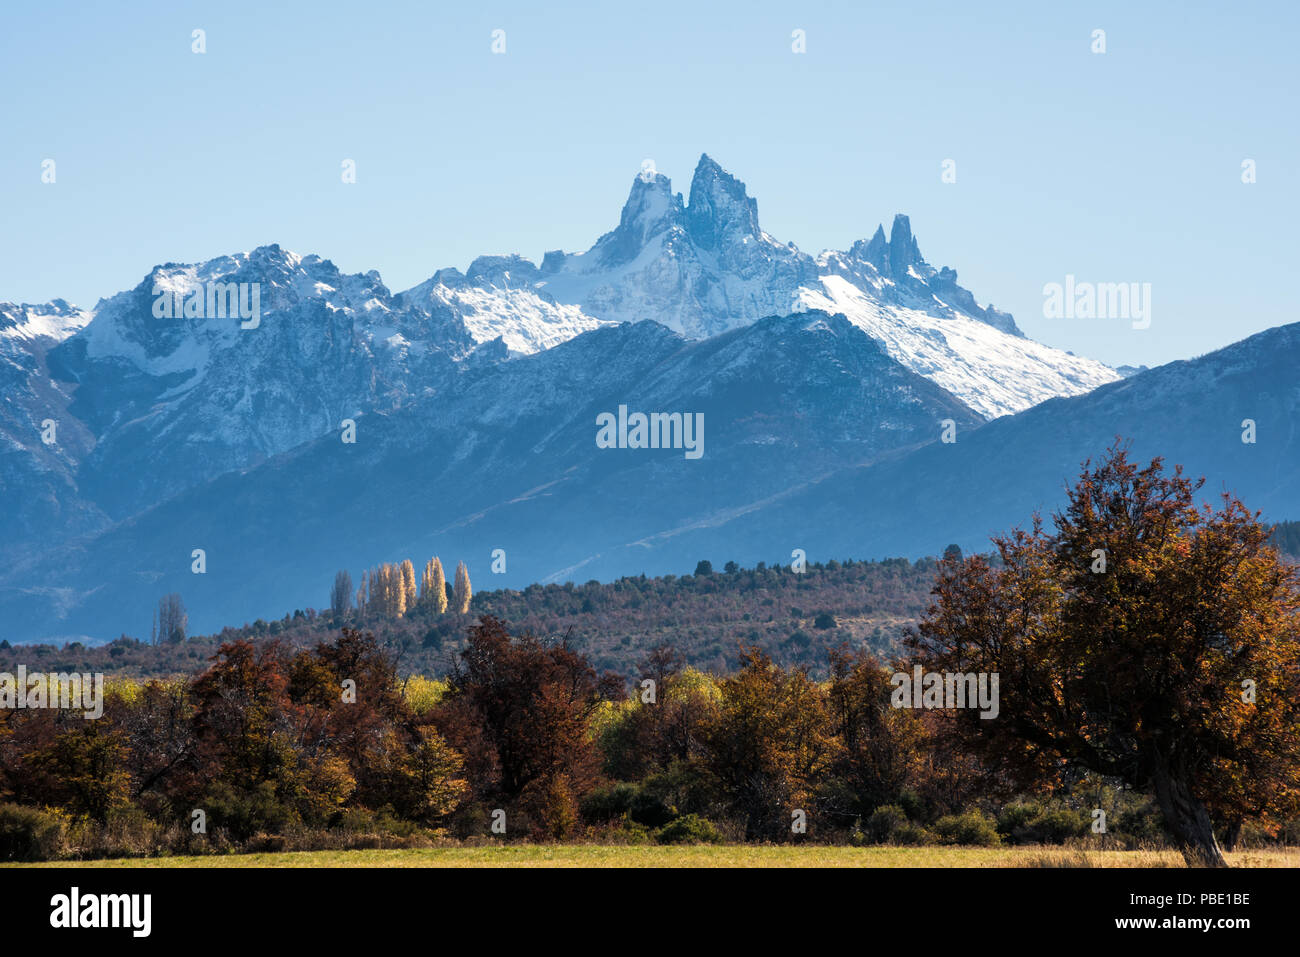 National Park Los Alerces, Chubut Province, Patagonia, Argentina Stock Photo